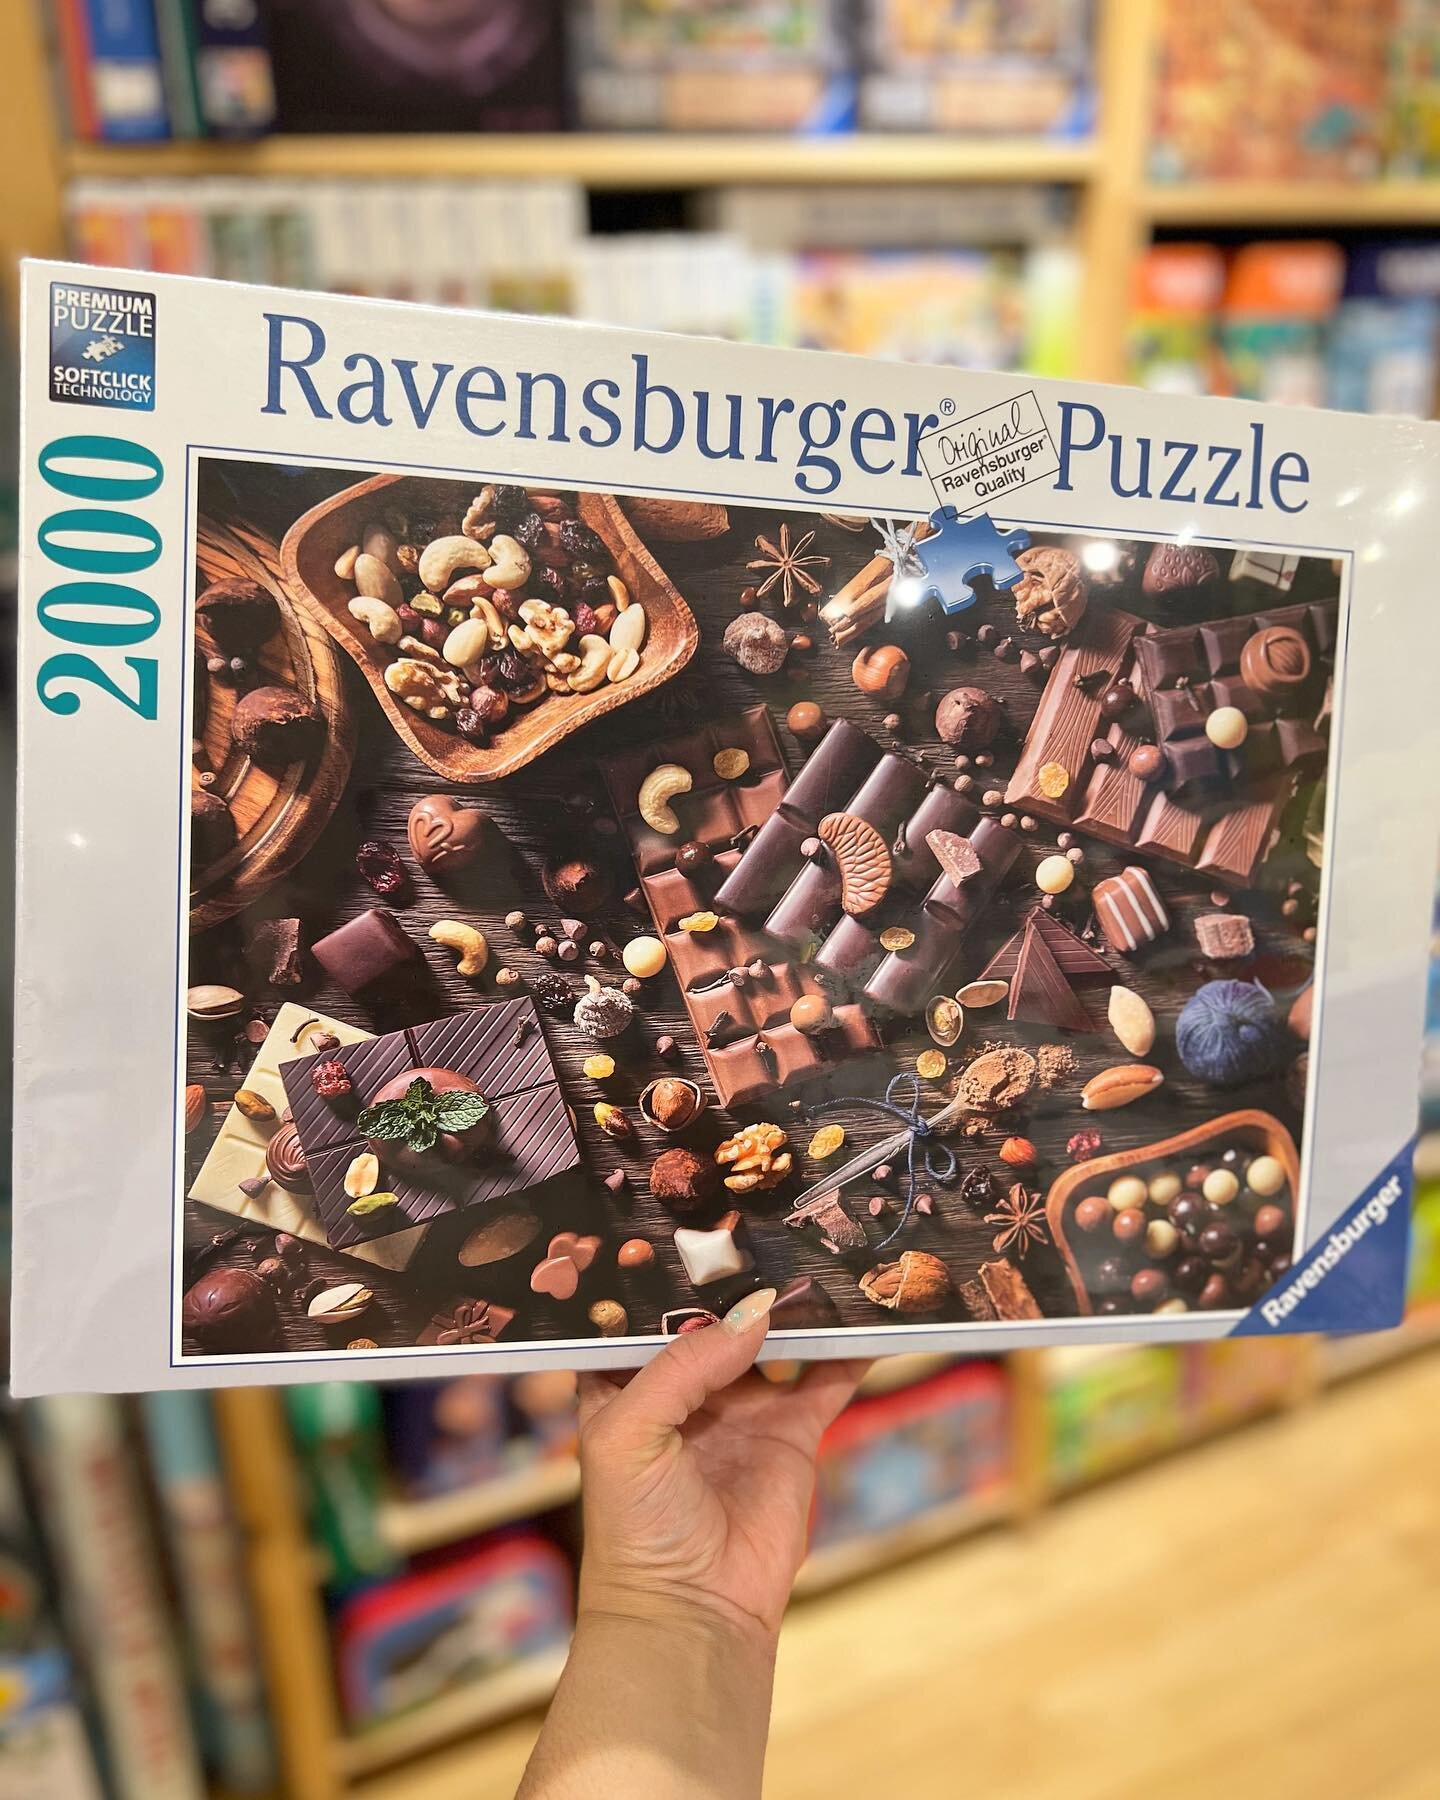 Mom wants a 2000pc box of chocolates (cough) I mean a 2000 pc puzzle 🍫

🤭 Visit us all weekend!
Saturday 10-6
Sunday 10-5